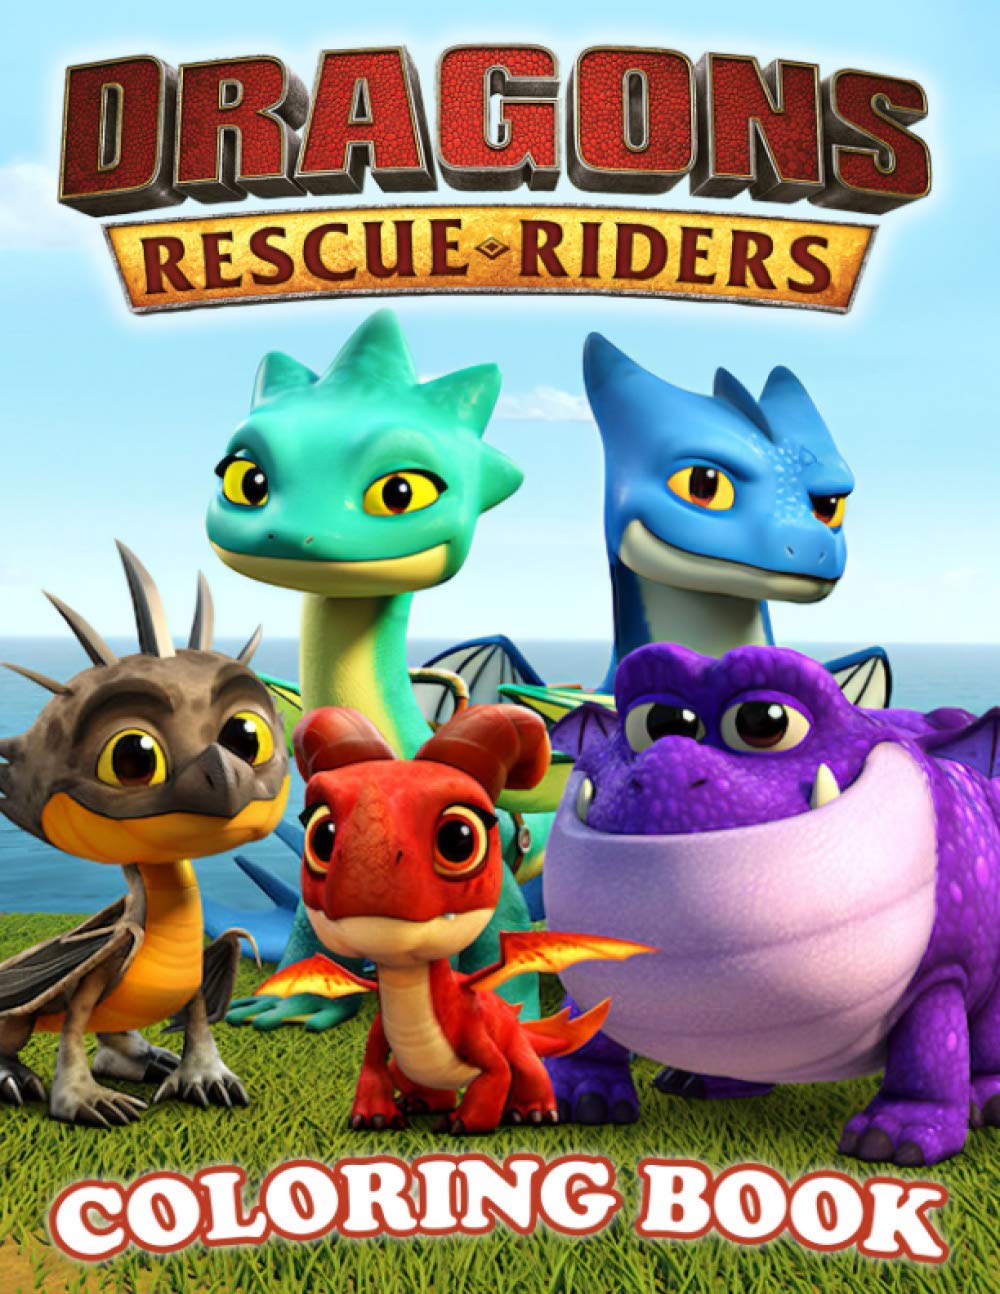 Dragons rescue riders coloring book a cool coloring book for gamers with many designs of dragons rescue riders to color for relaxation by carmela kohler